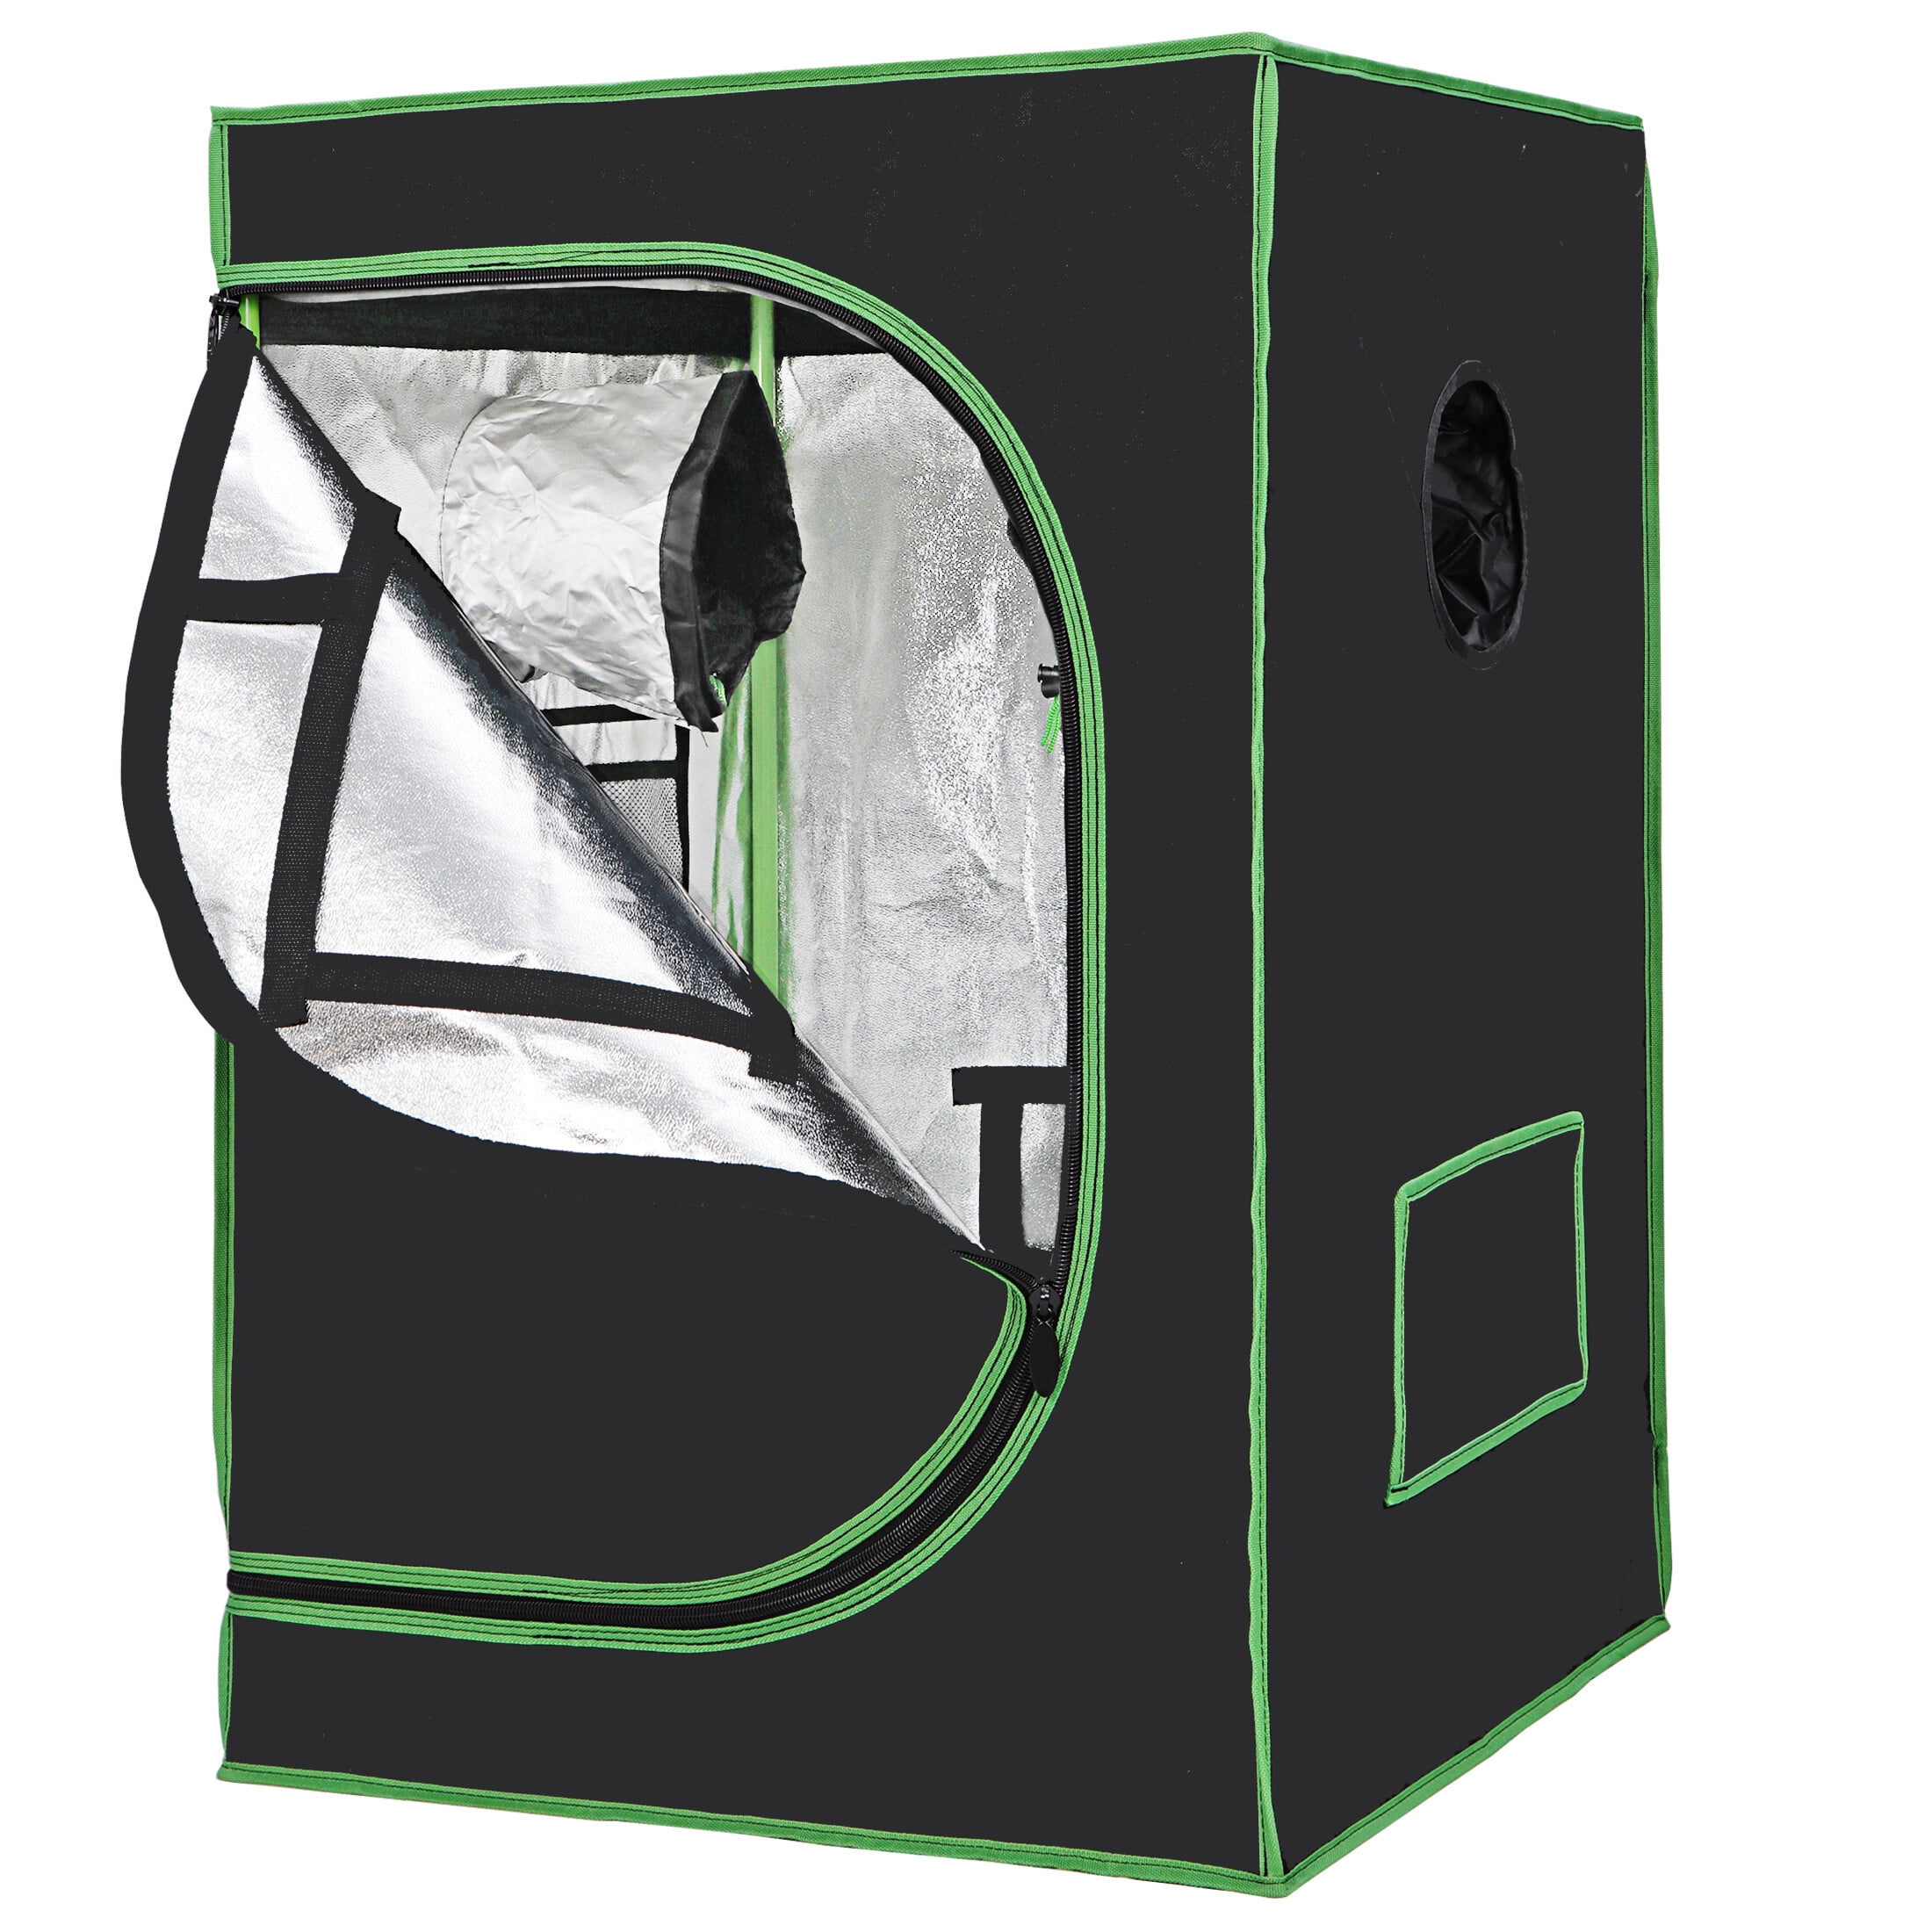 Quictent 96"x96"x78" Reflective Mylar Hydroponic Grow Tent with View Window Bag 